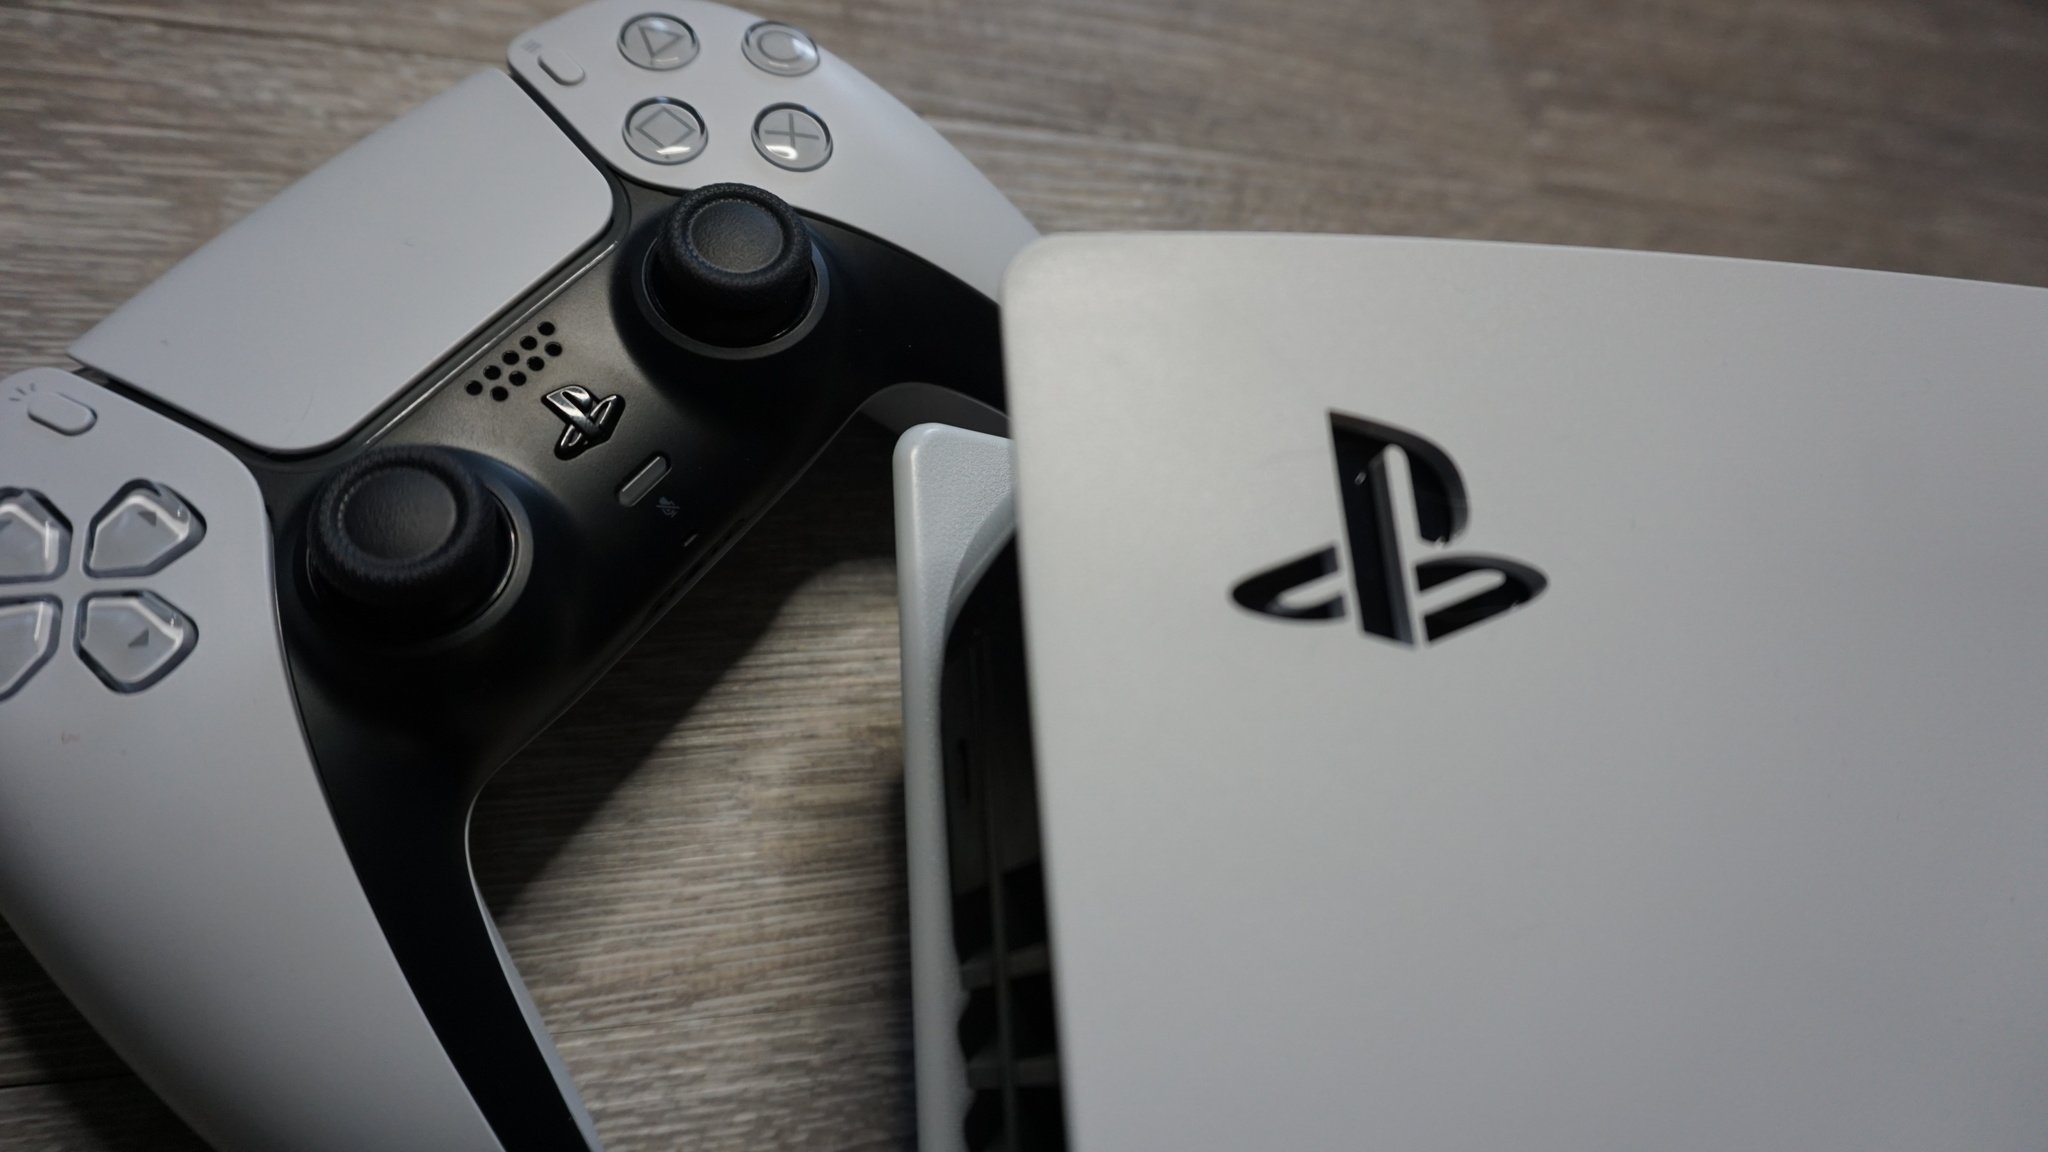 PS5 Cloud Gaming Live in Eligible Regions, Gets Good Response